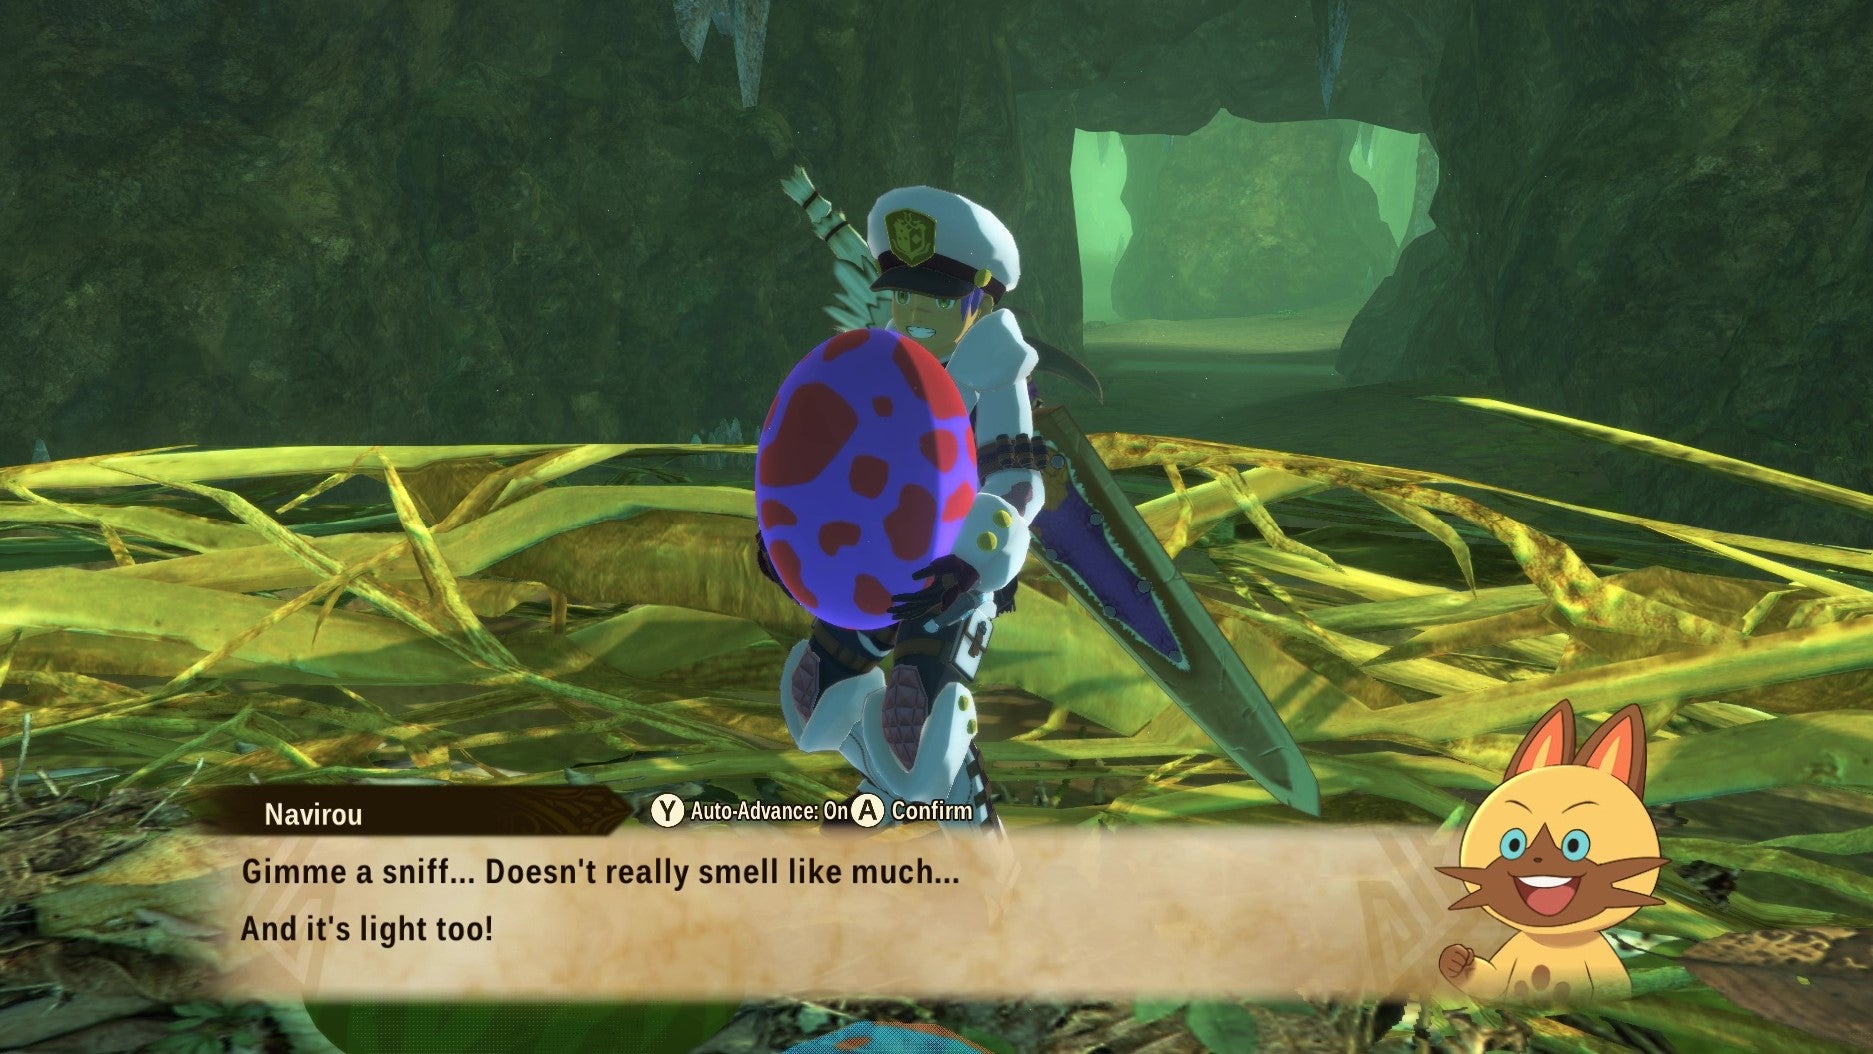 An image from Monster Hunter Stories 2 which shows the player holding a monster egg, having just snatched it from a nest. Navirou the cat comments on its smell and weight.